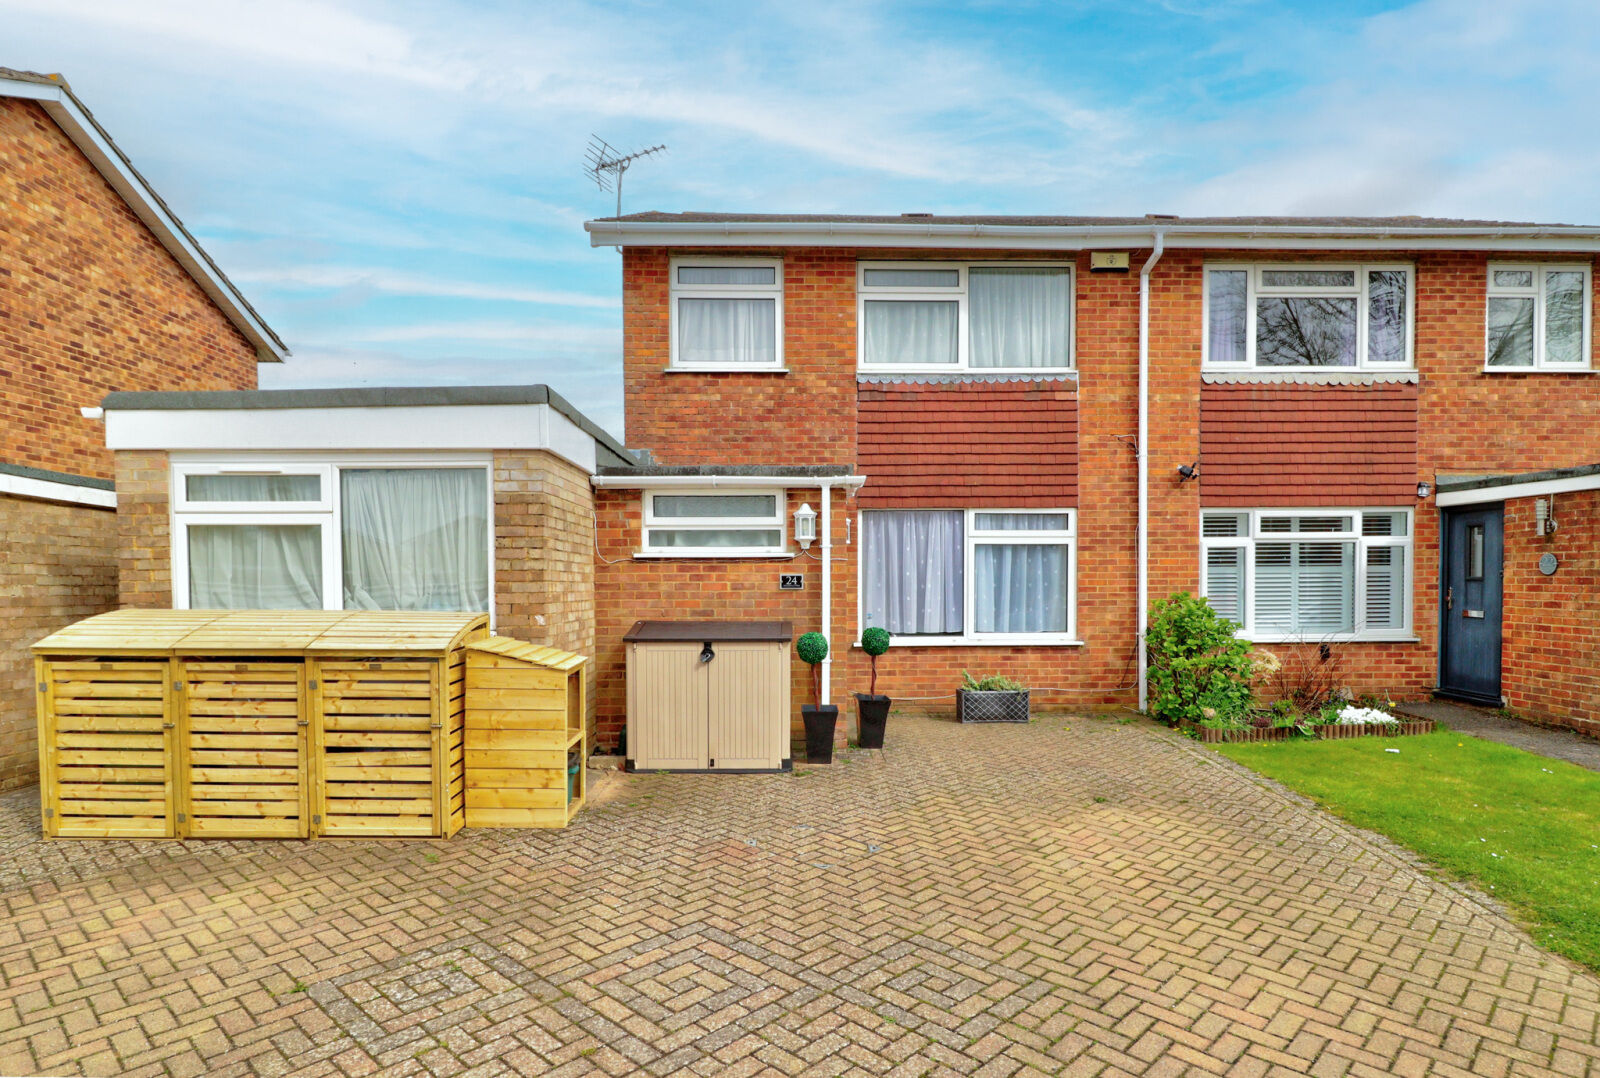 3 bedroom semi detached house for sale Highfield Way, Hazlemere, HP15, main image